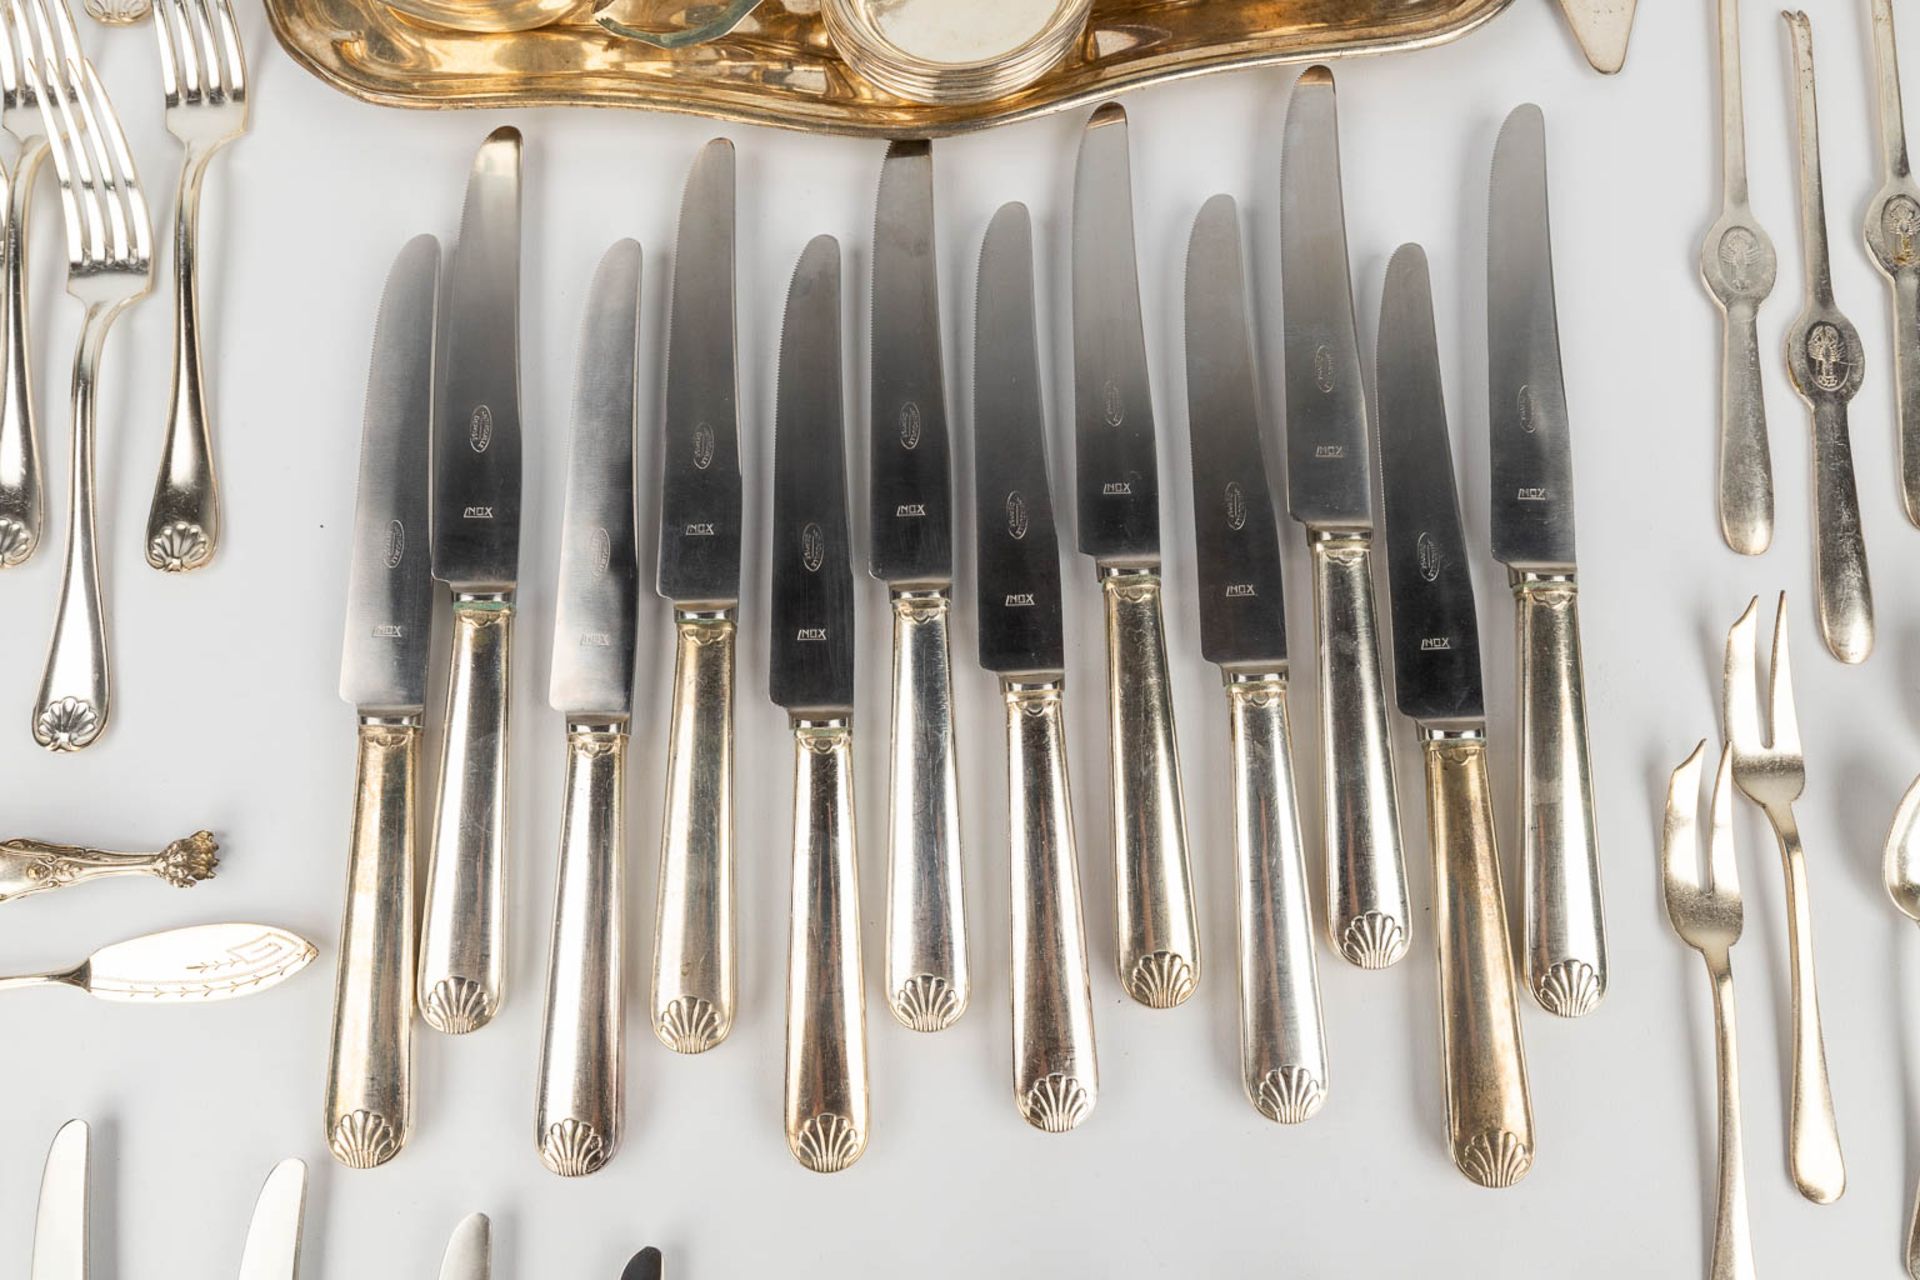 A large collection of cutlery and table accessories made of silver-plated metal. - Image 5 of 12